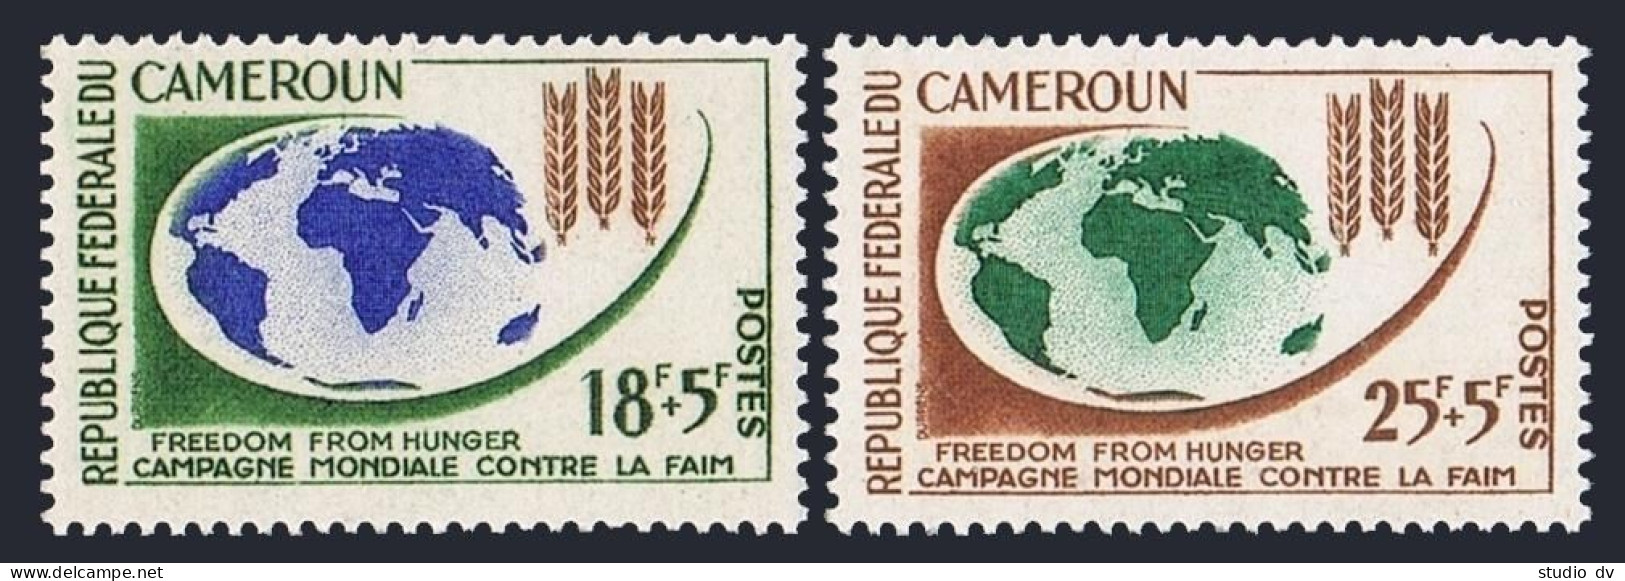 Cameroun B37-B38, MNH. Michel 386-387. FAO. Freedom From Hunger, 1963. Map. - Cameroon (1960-...)